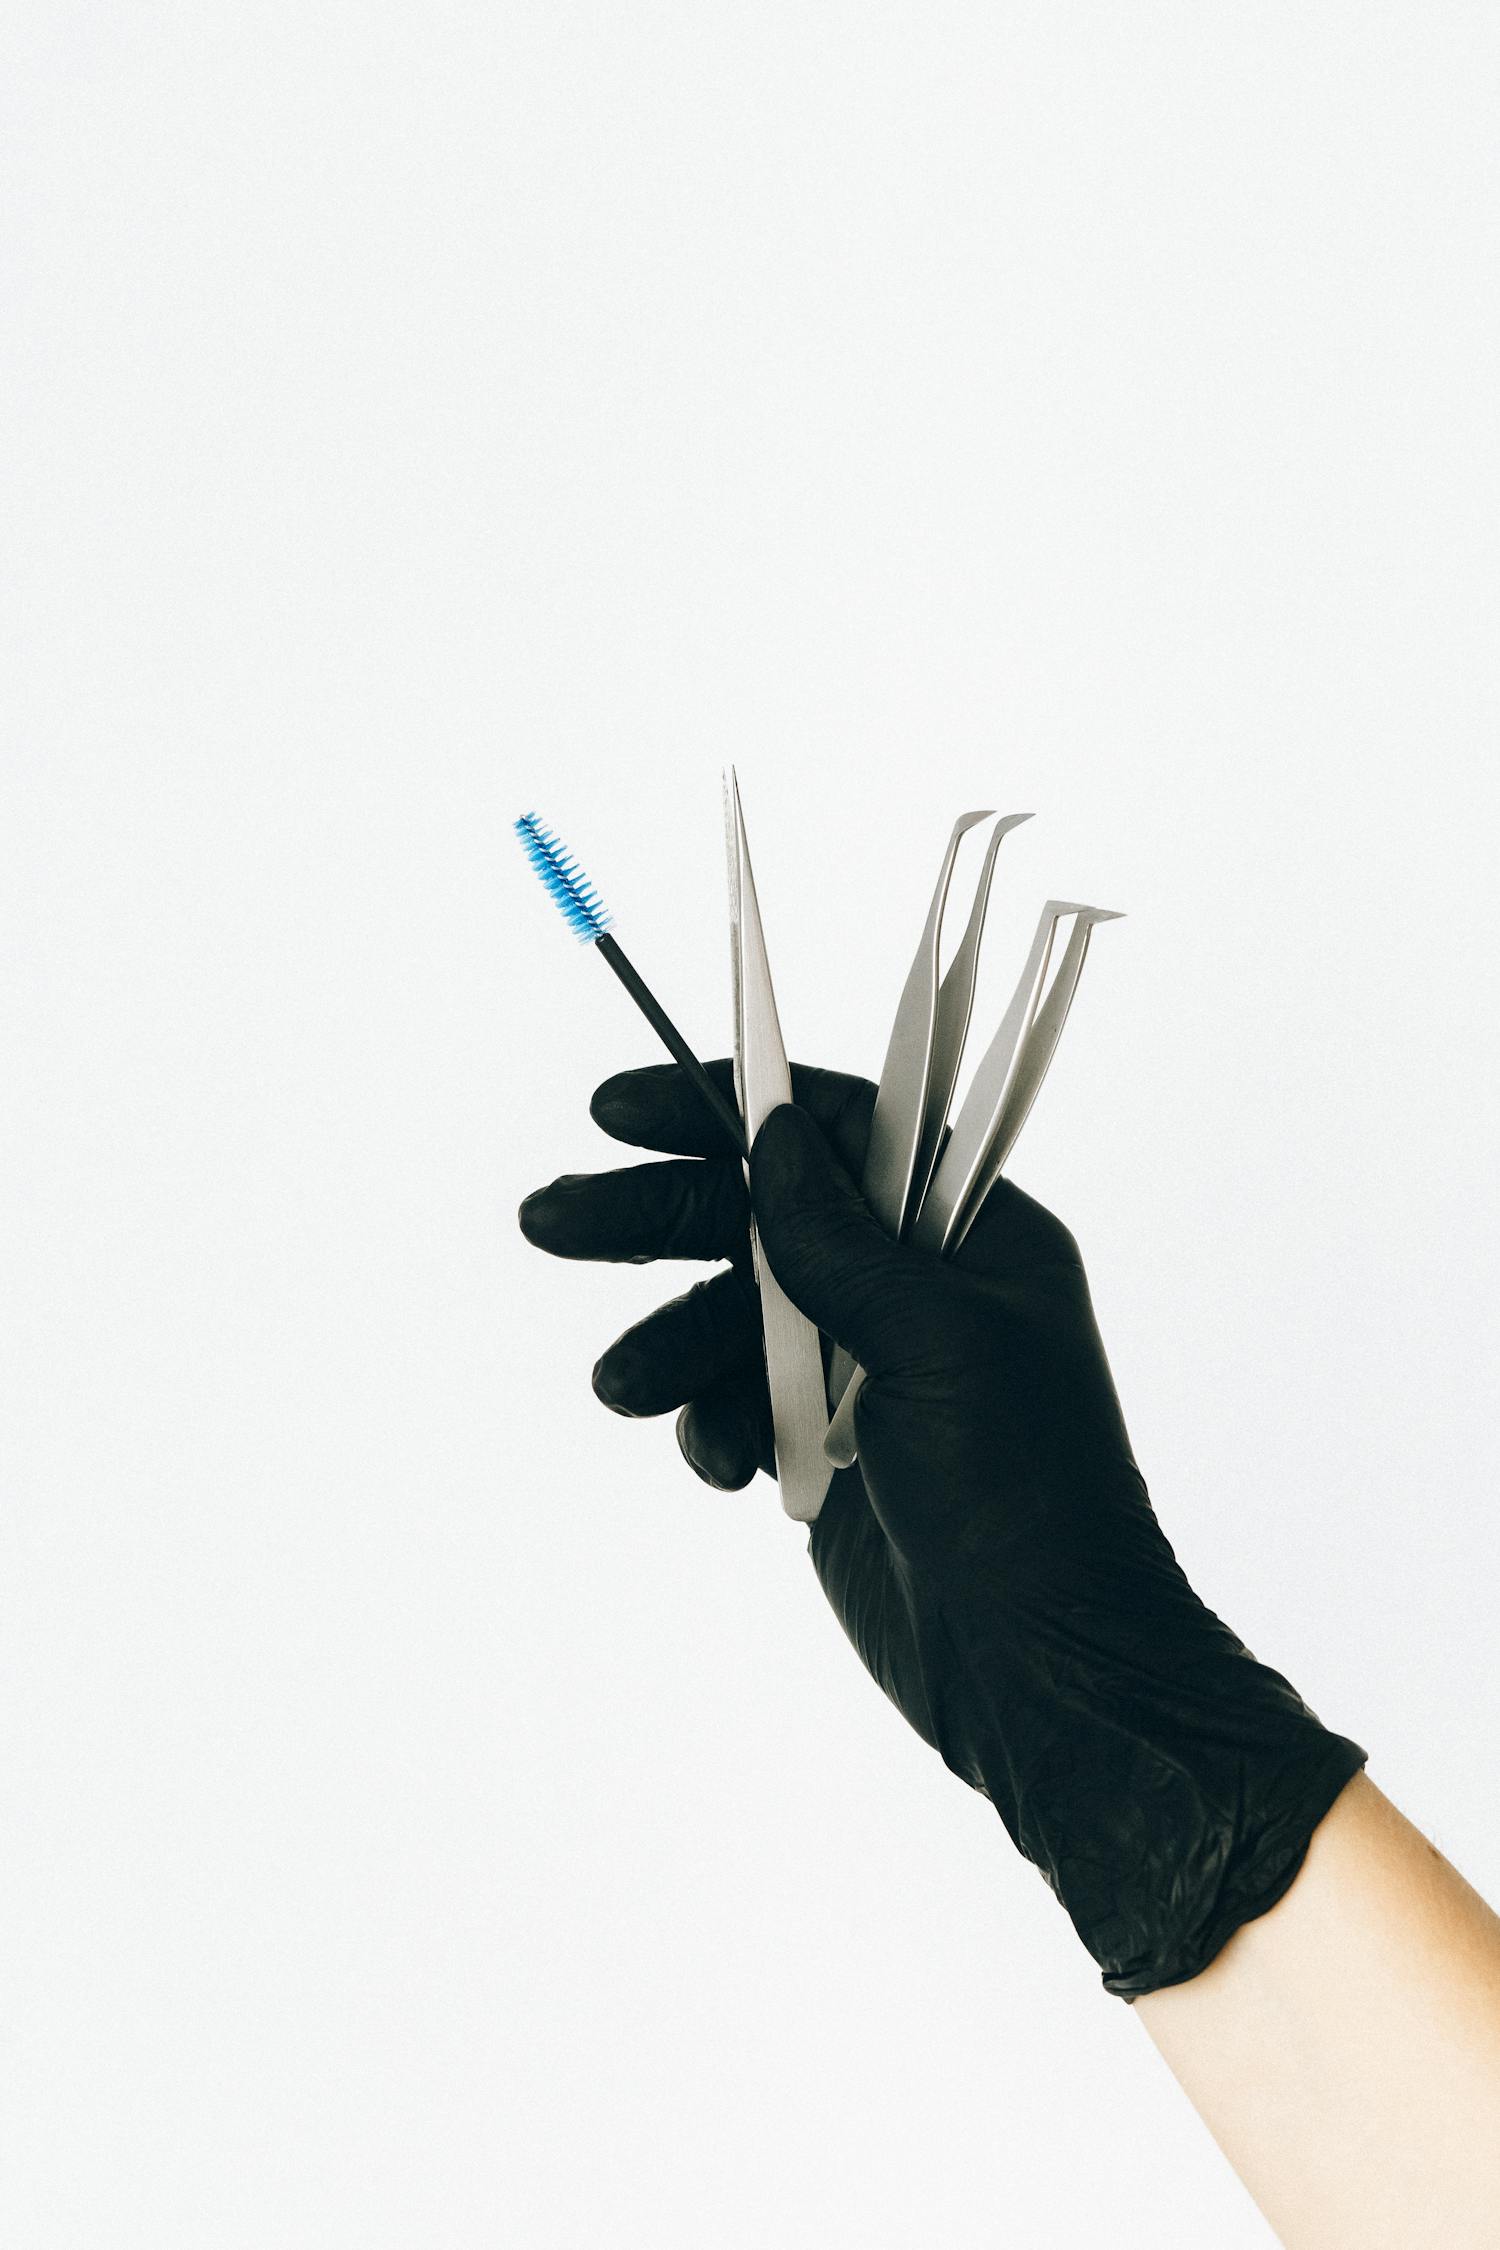 Person Holding White and Blue Pen · Free Stock Photo